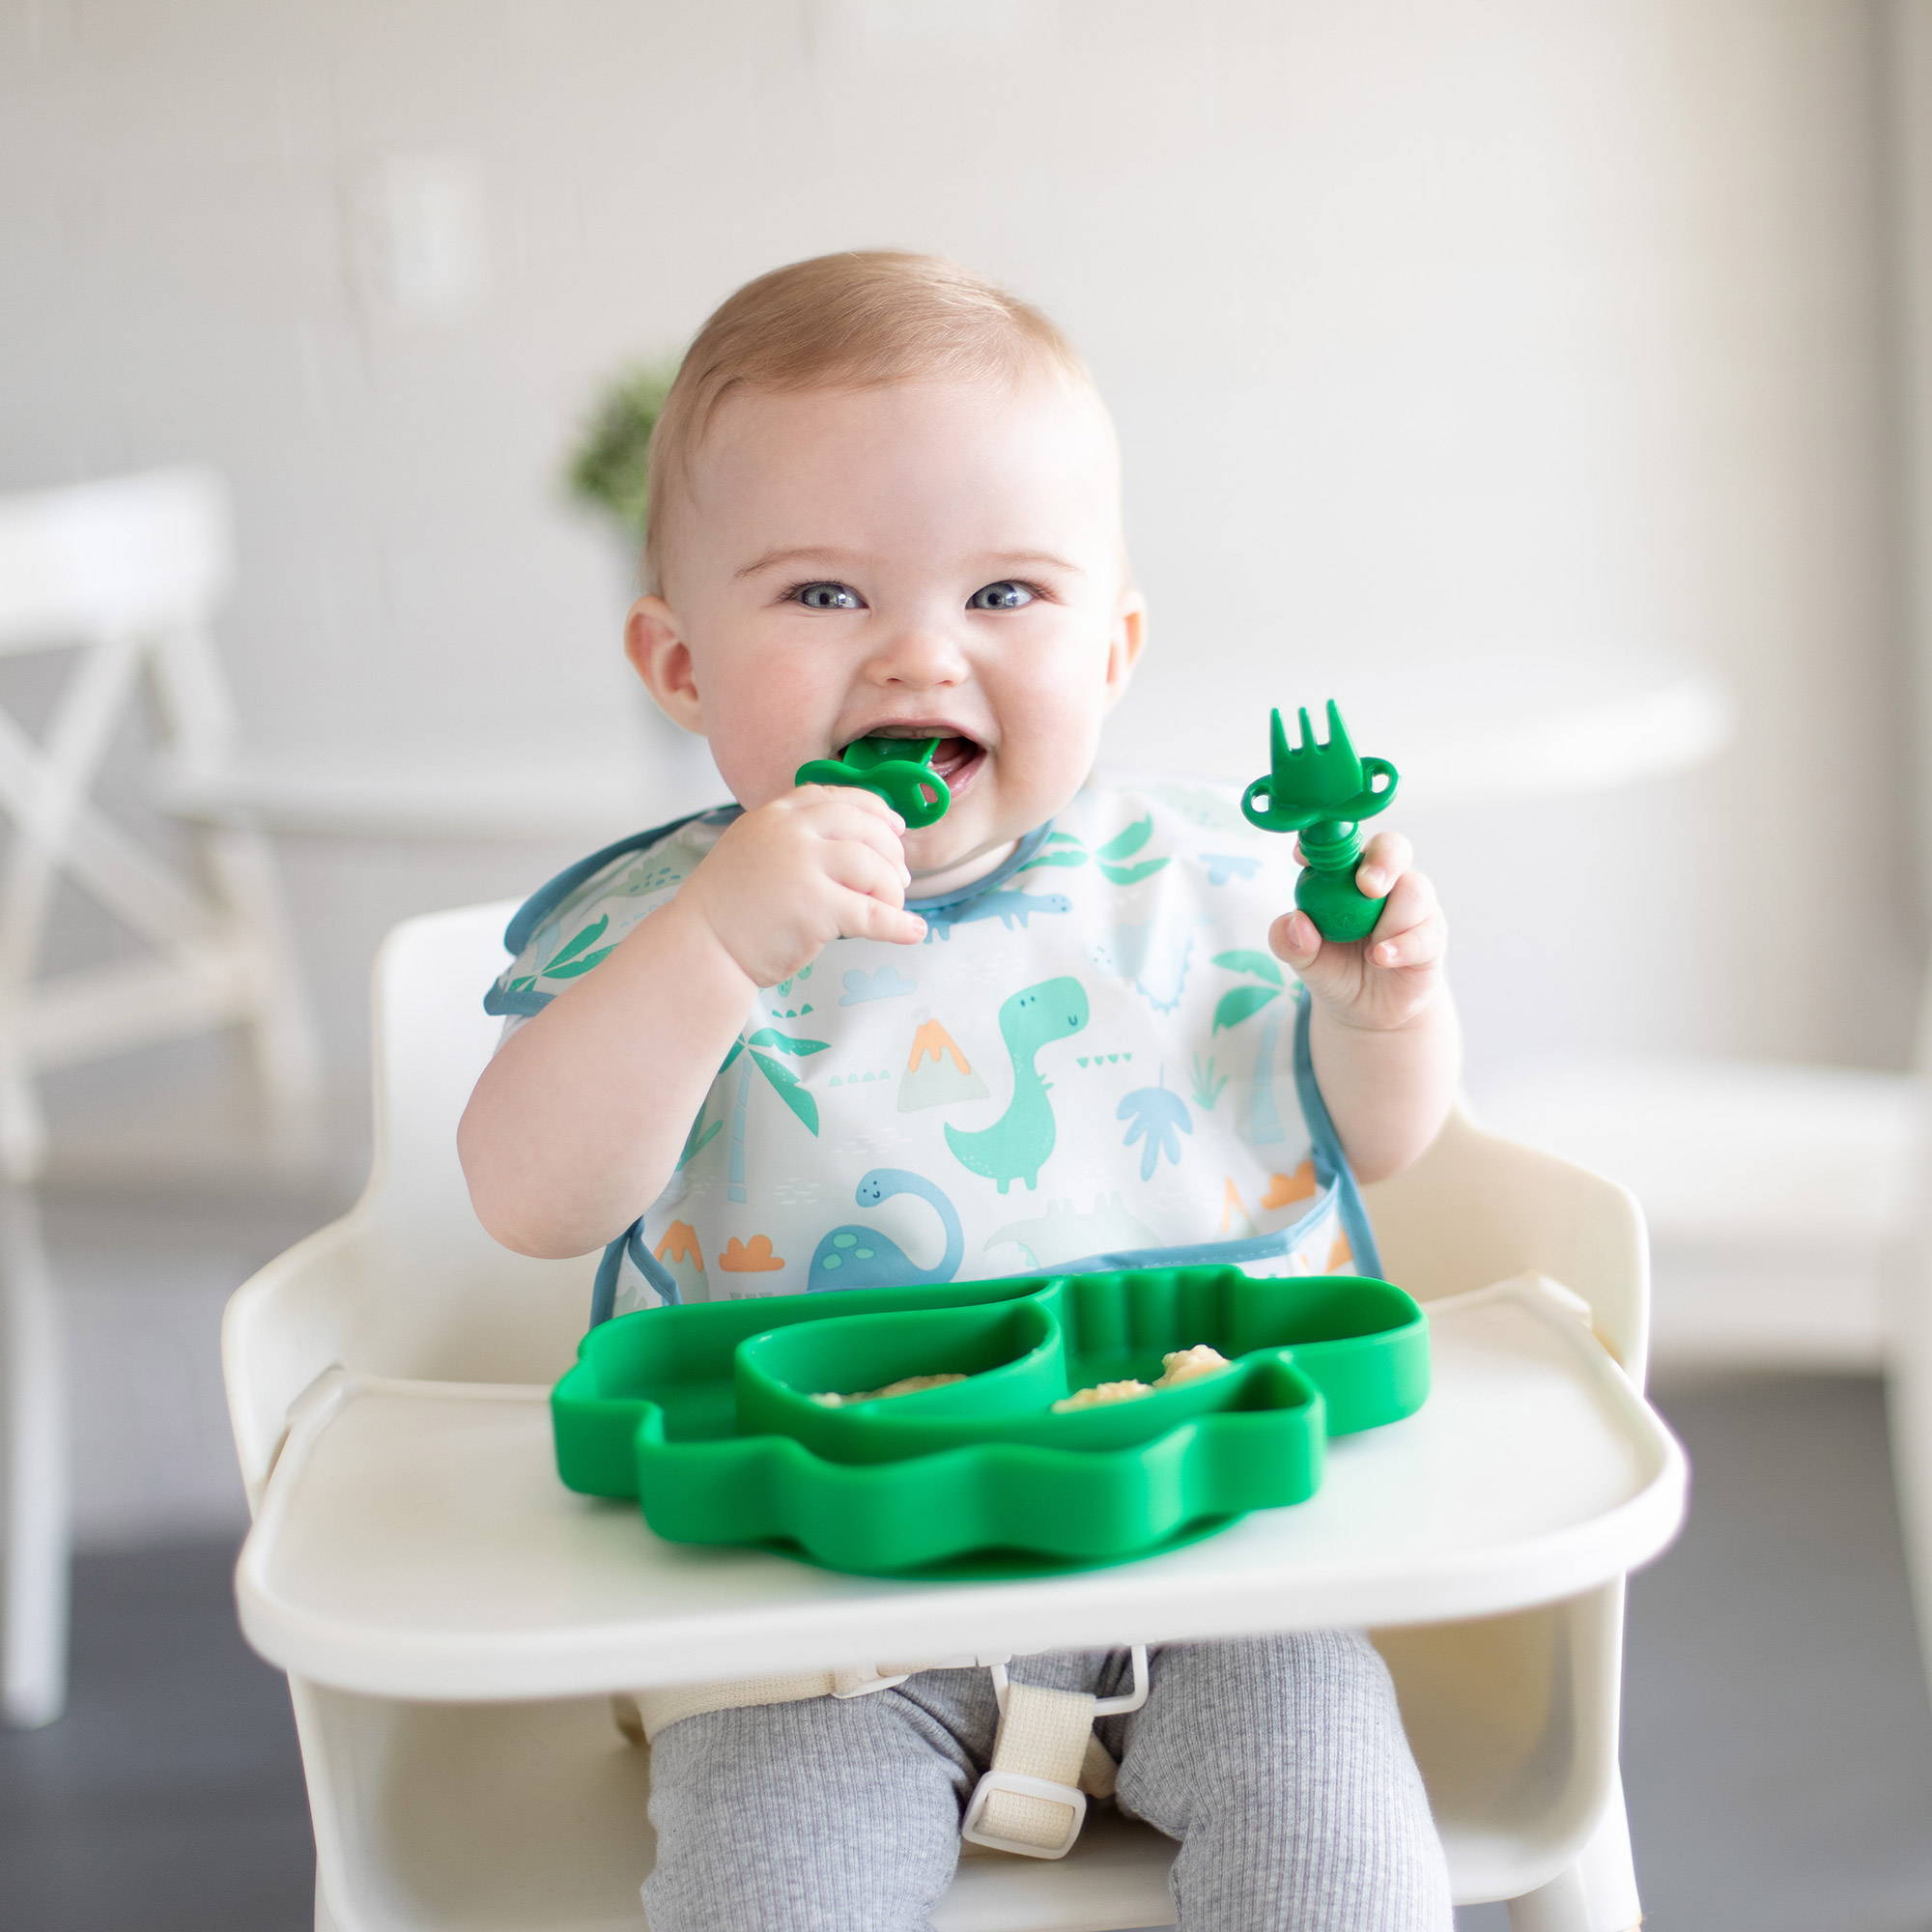 Why Our Baby Utensils Are Specific to Self-Feeding